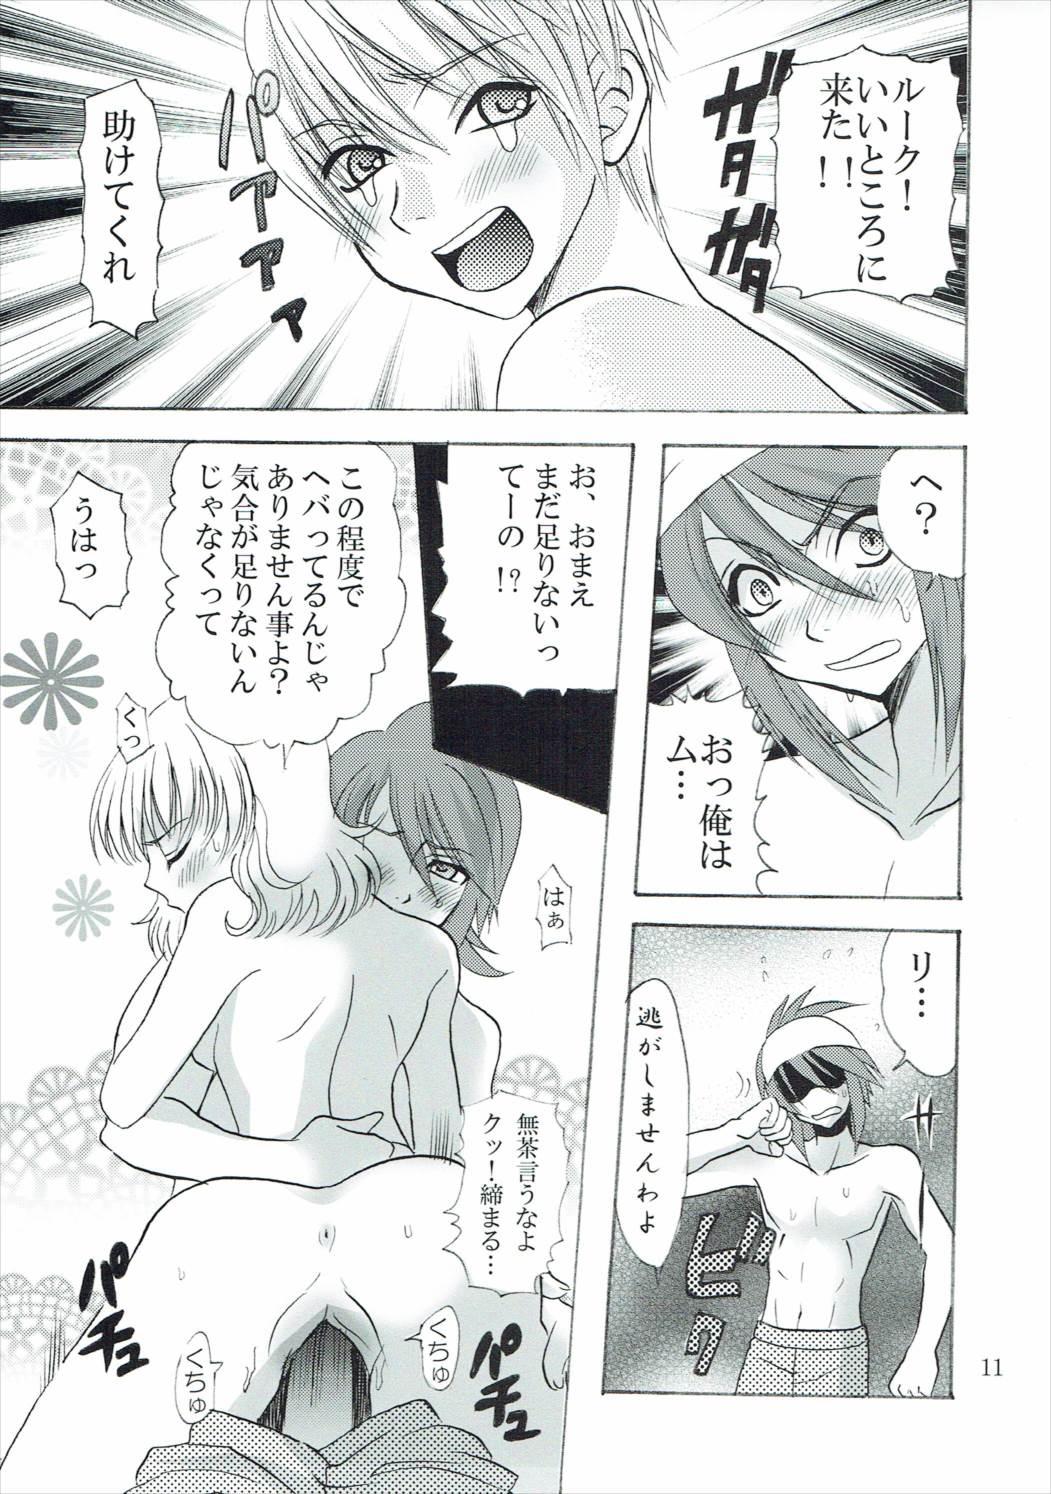 Girl Fuck 興味津々お年頃 - Tales of the abyss Vagina - Page 10